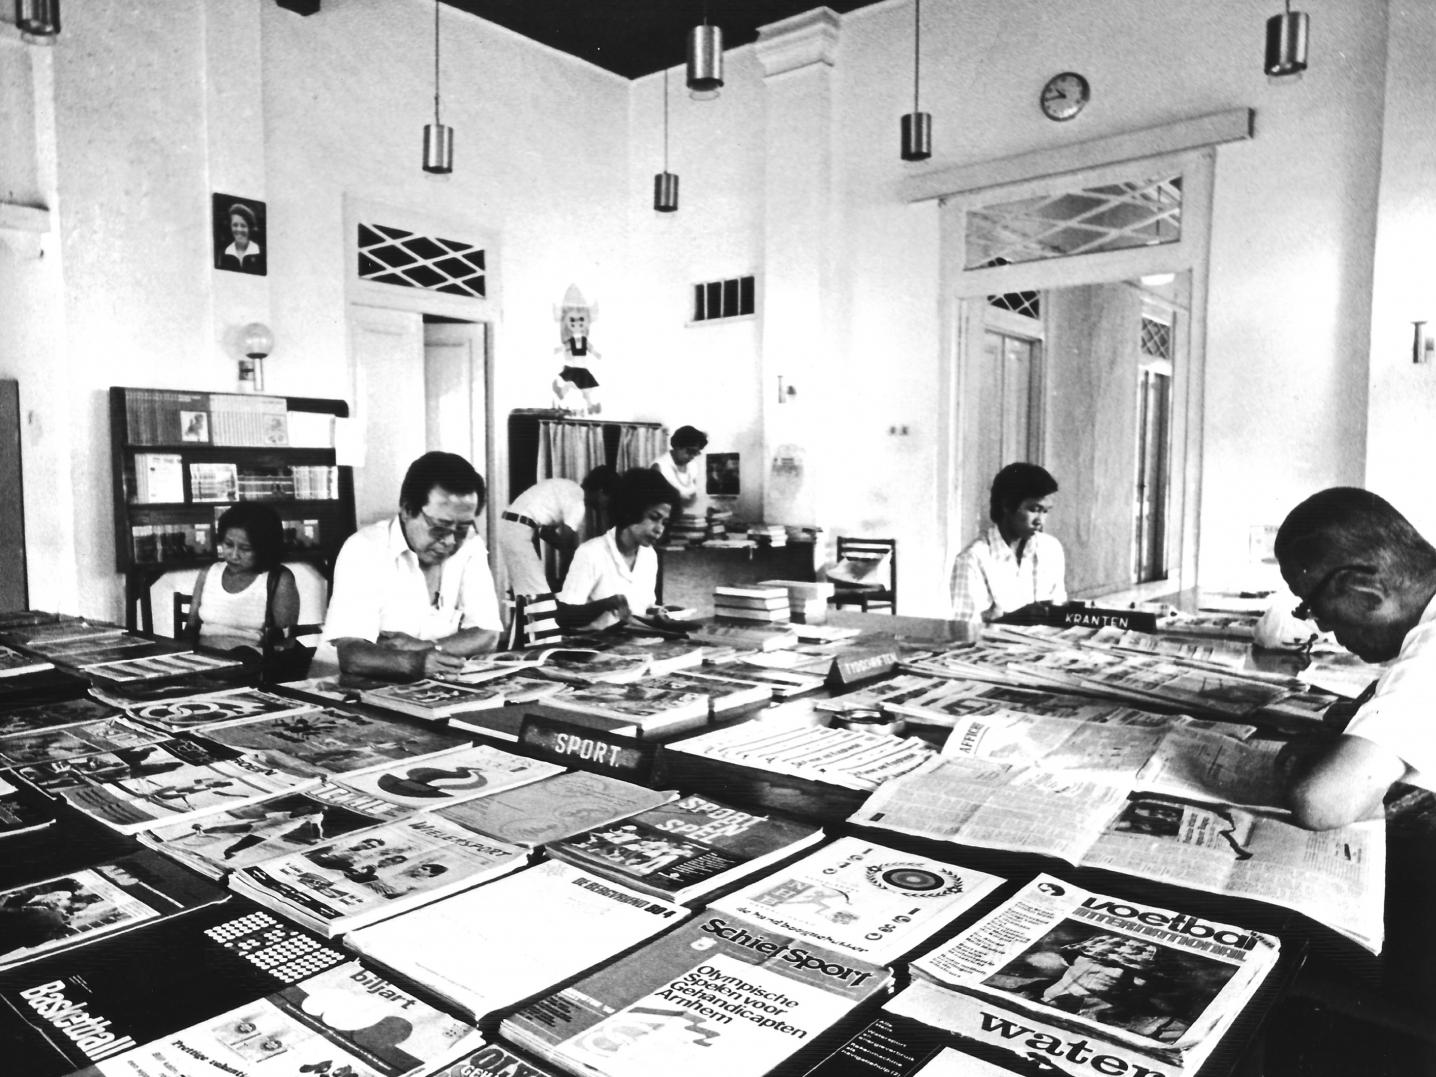 a 1970 photo of the reading room of the former Erasmus Huis, Jakarta, with people sitting around a table reading newspapers